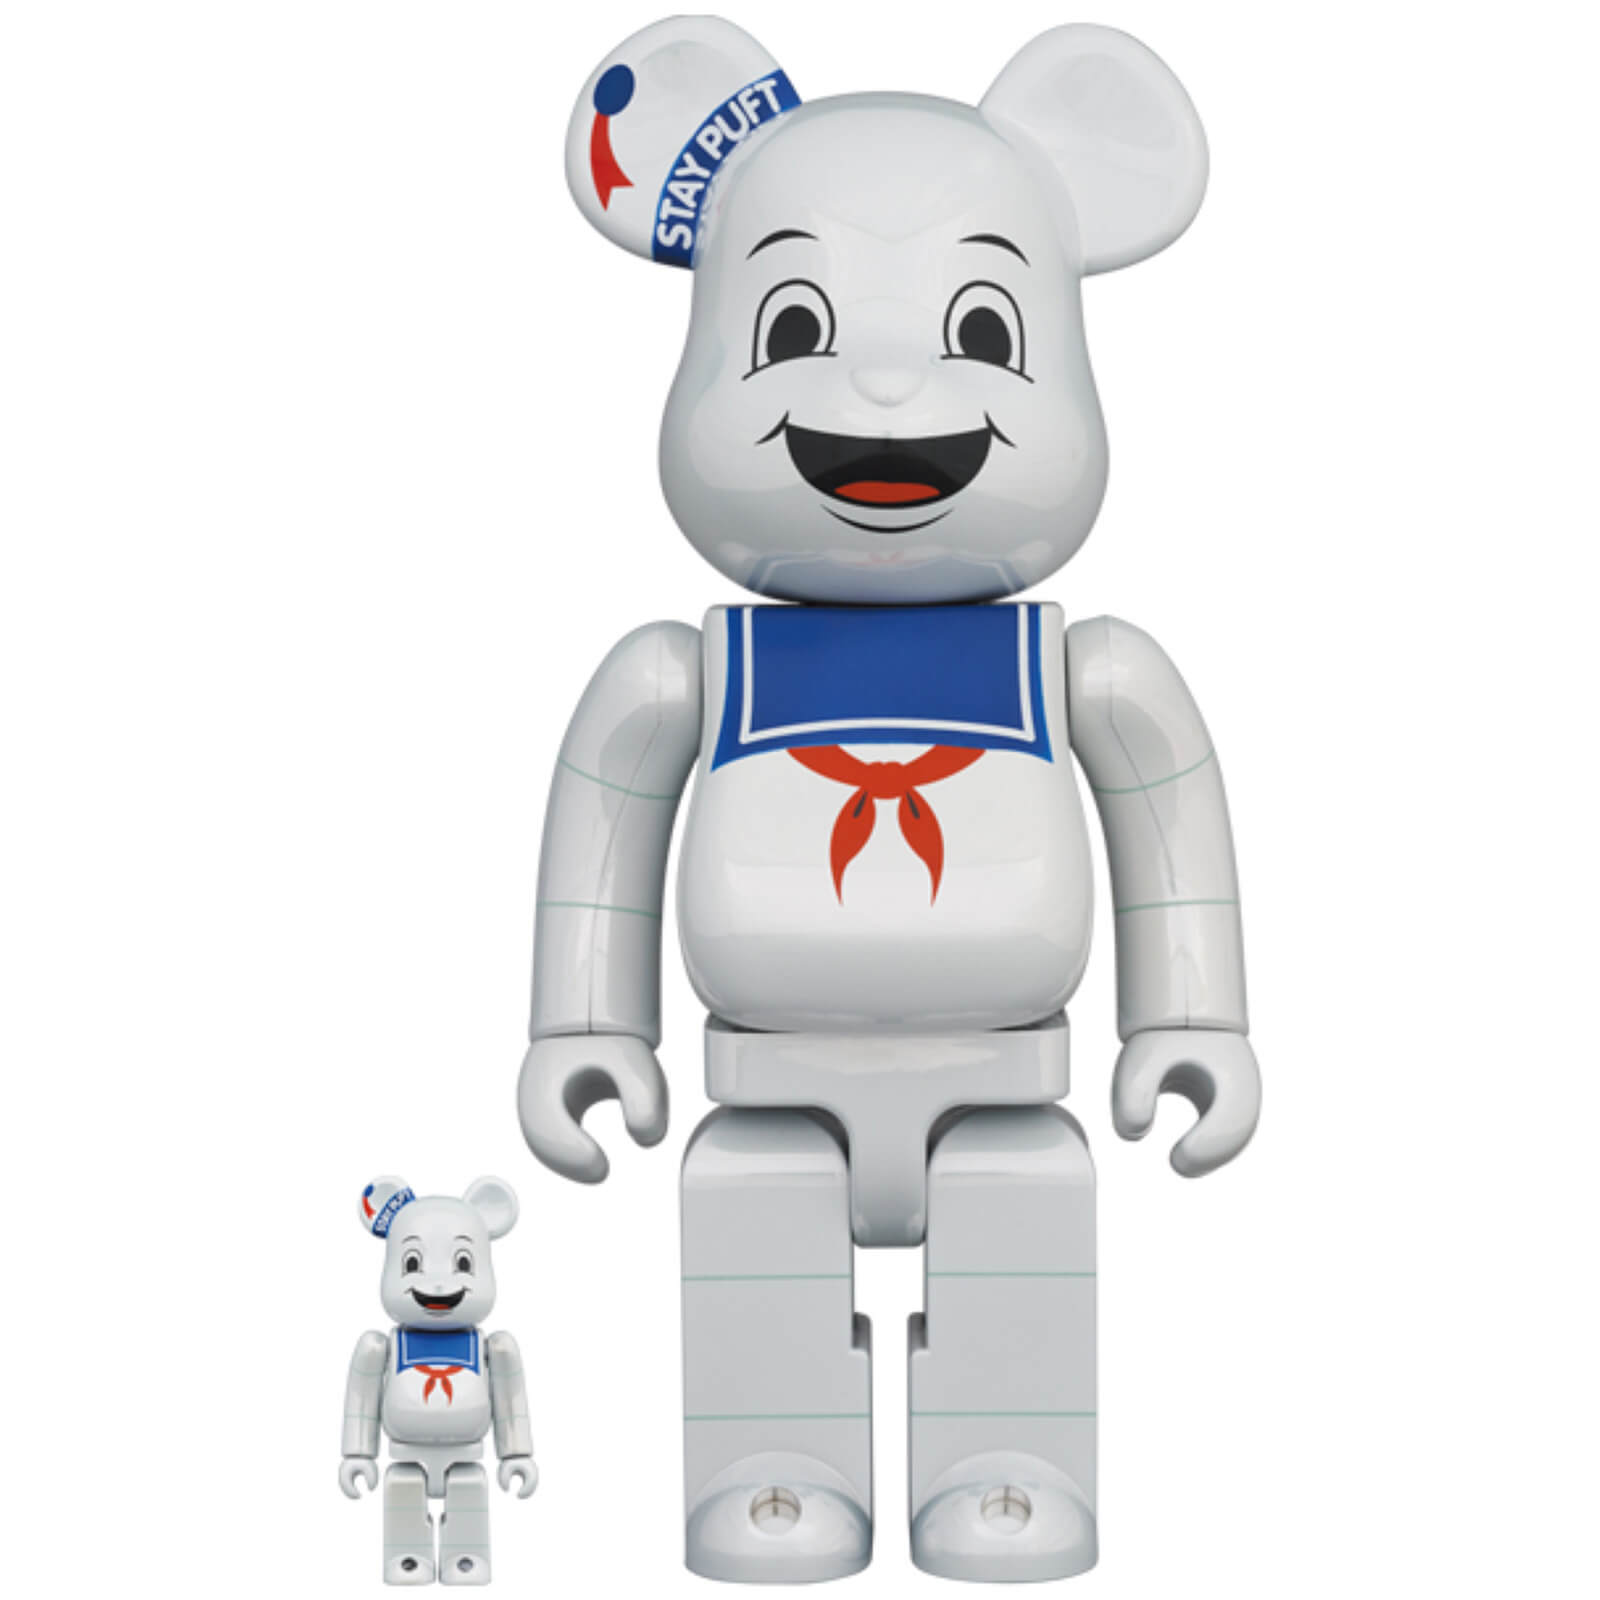 Medicom Ghostbusters White Chrome Stay-Puft Marshmallow Man 100% X 400% Be@rbrick 2 Pack